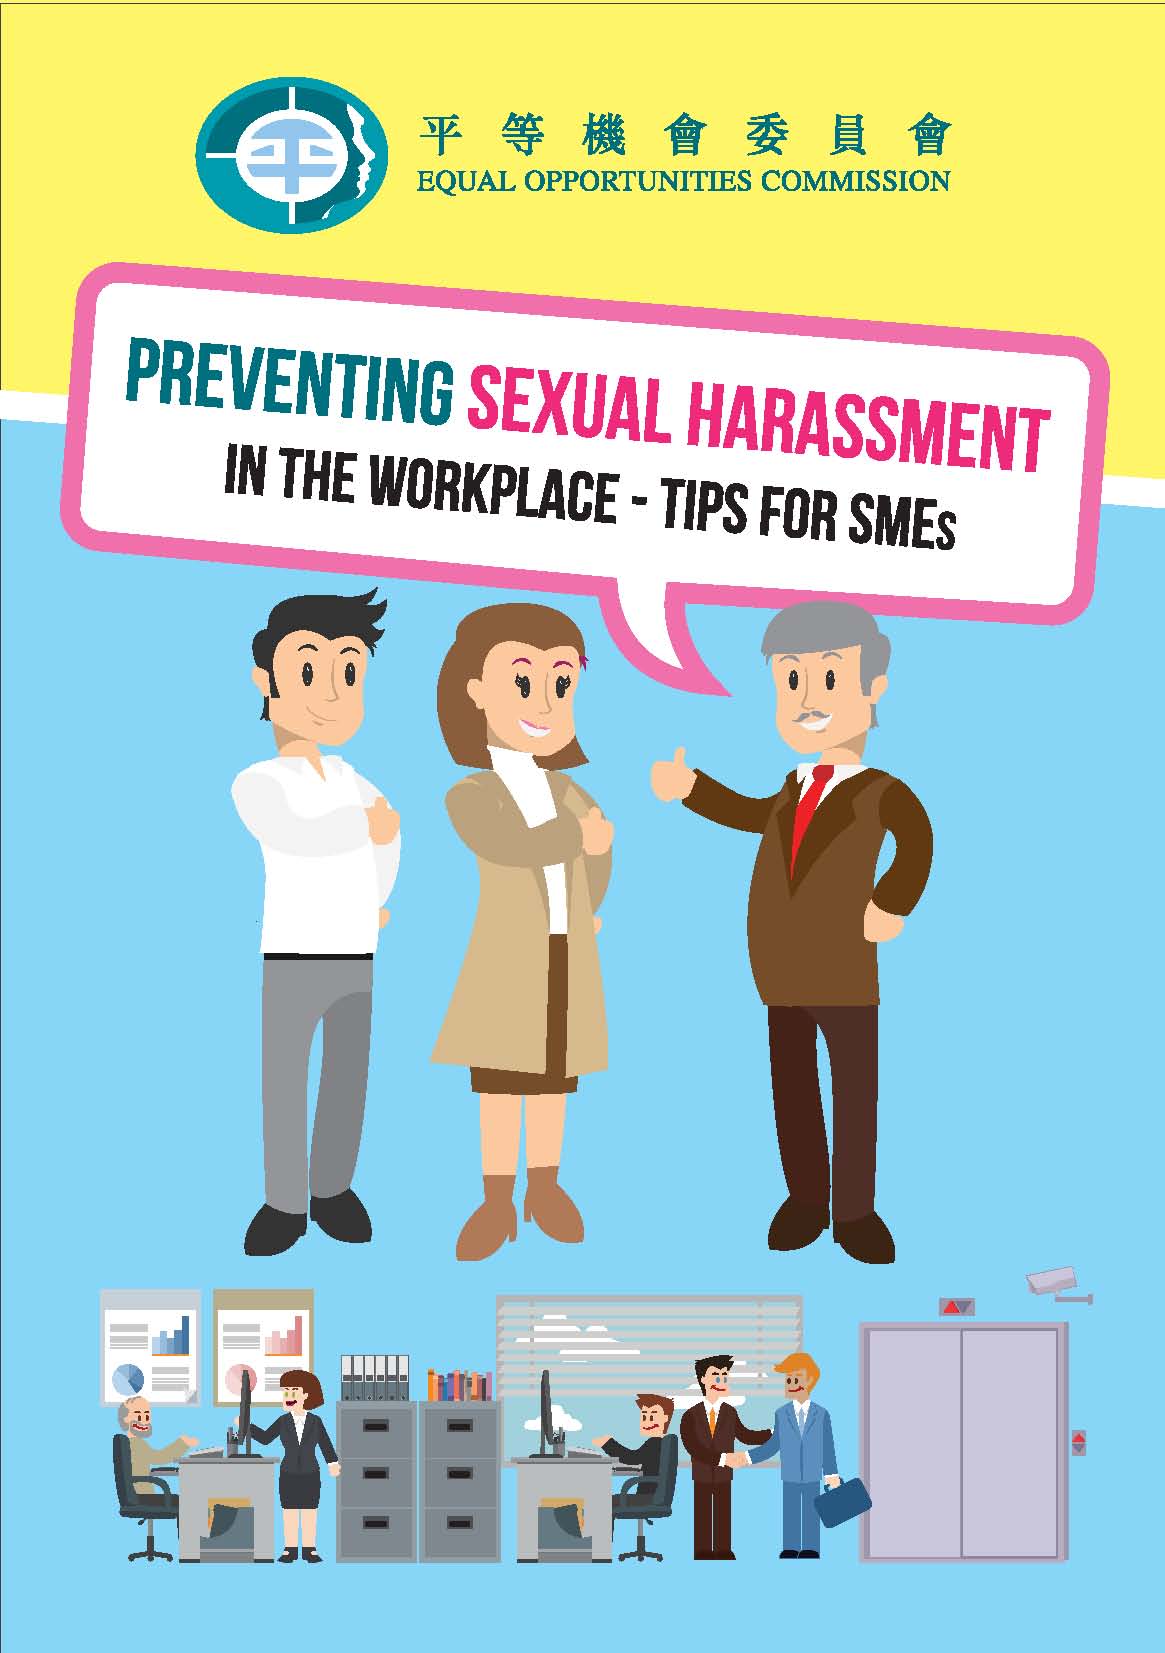 Cover of booklet on “Preventing Sexual Harassment in the Workplace – Tips for SMEs”